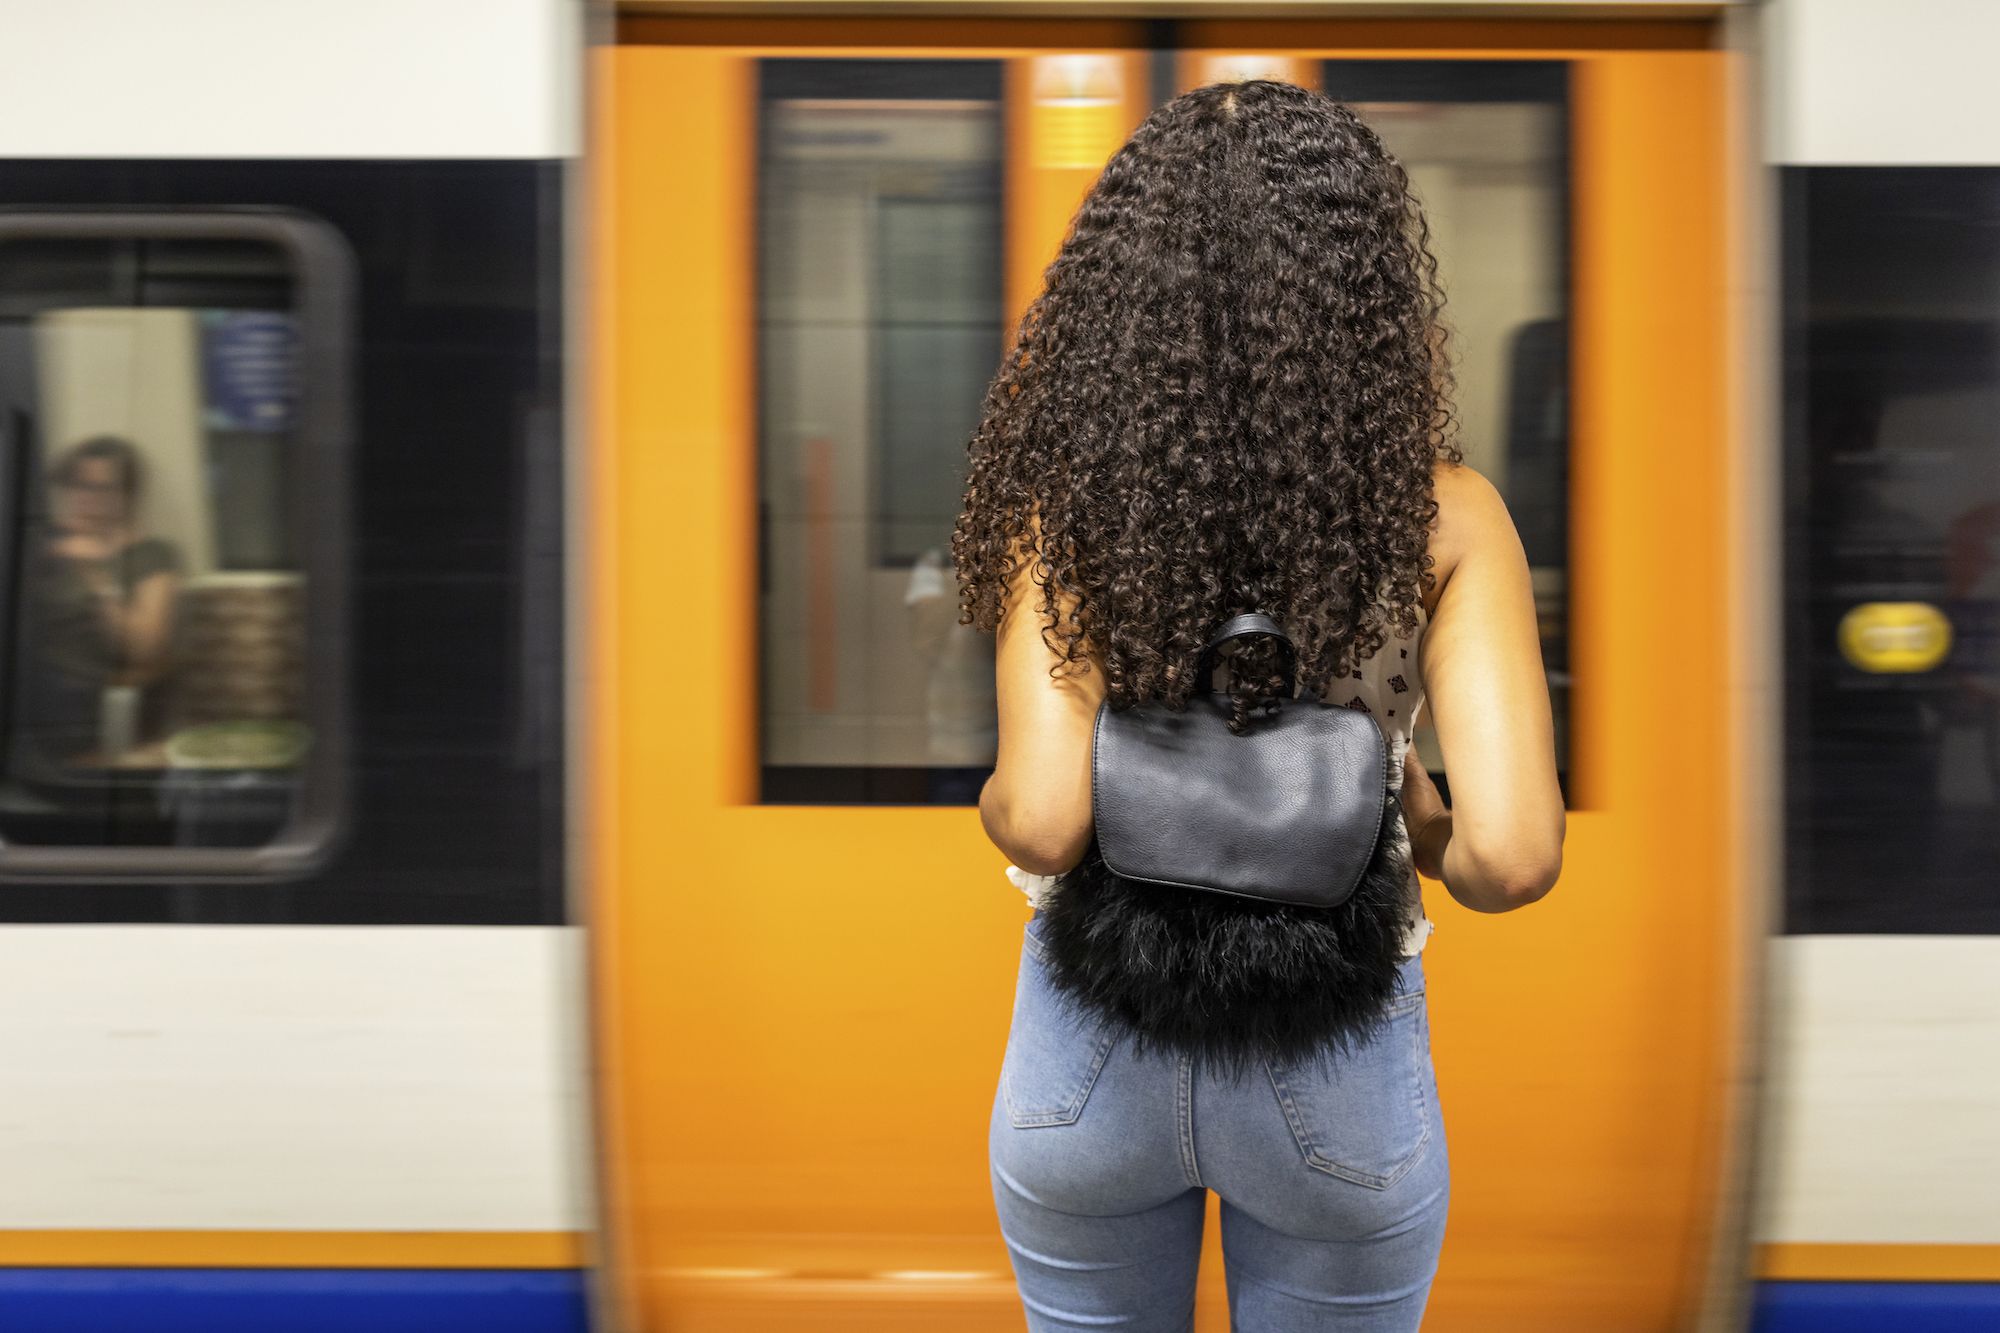 UK, London,  rear view of young woman waiting at underground station platform